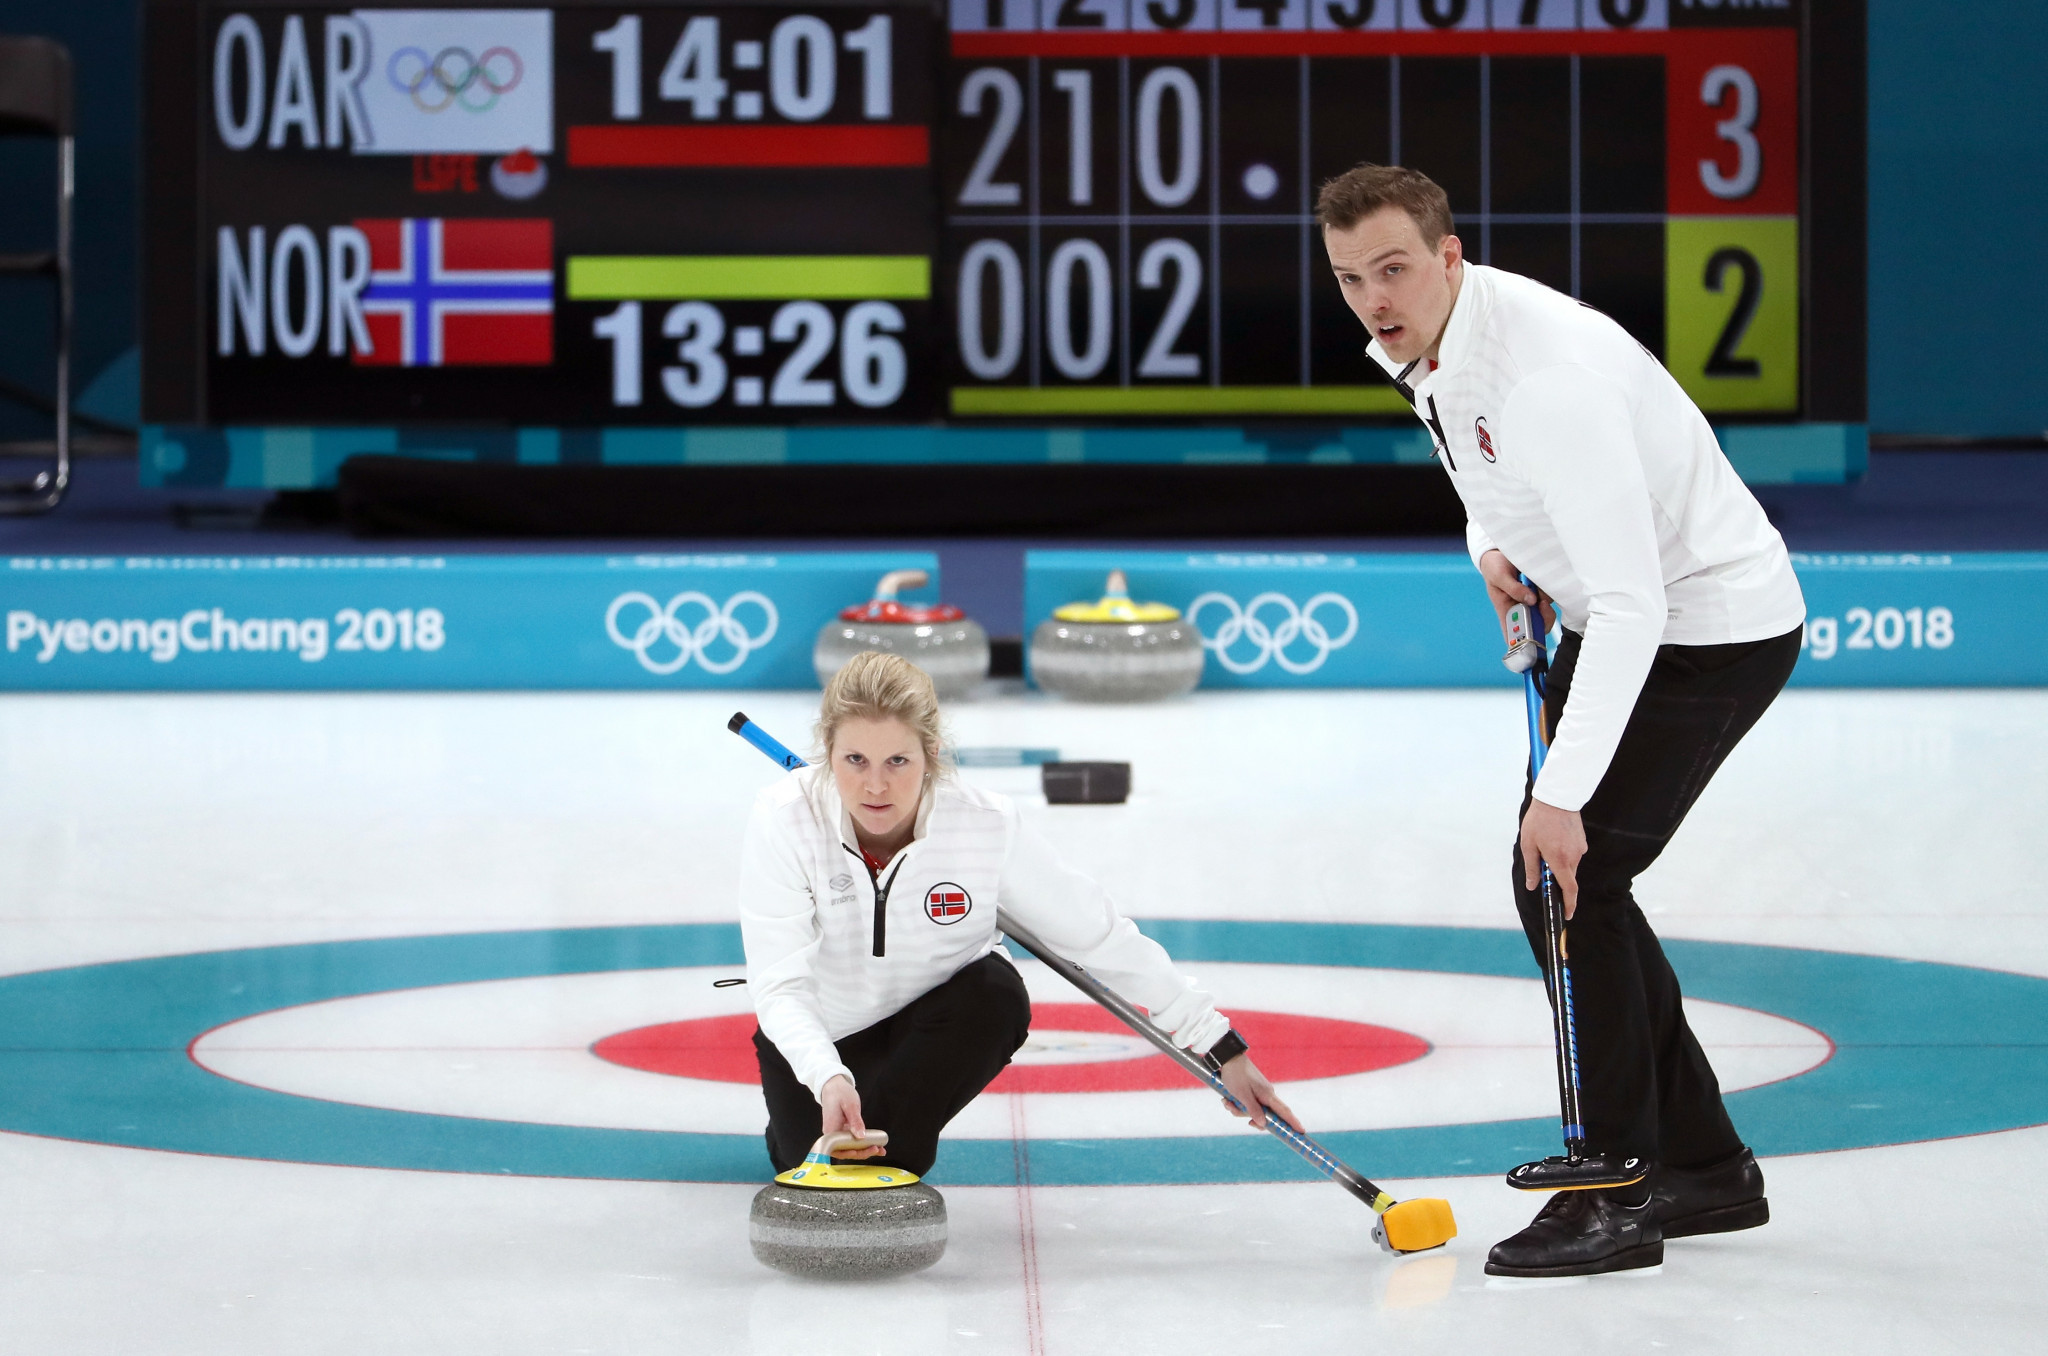 Norway’s mixed doubles curling team of Magnus Nedregotten and Kristin Skaslien lost the Pyeongchang 2018 bronze medal match 8-4 to the OAR side last week ©Getty Images